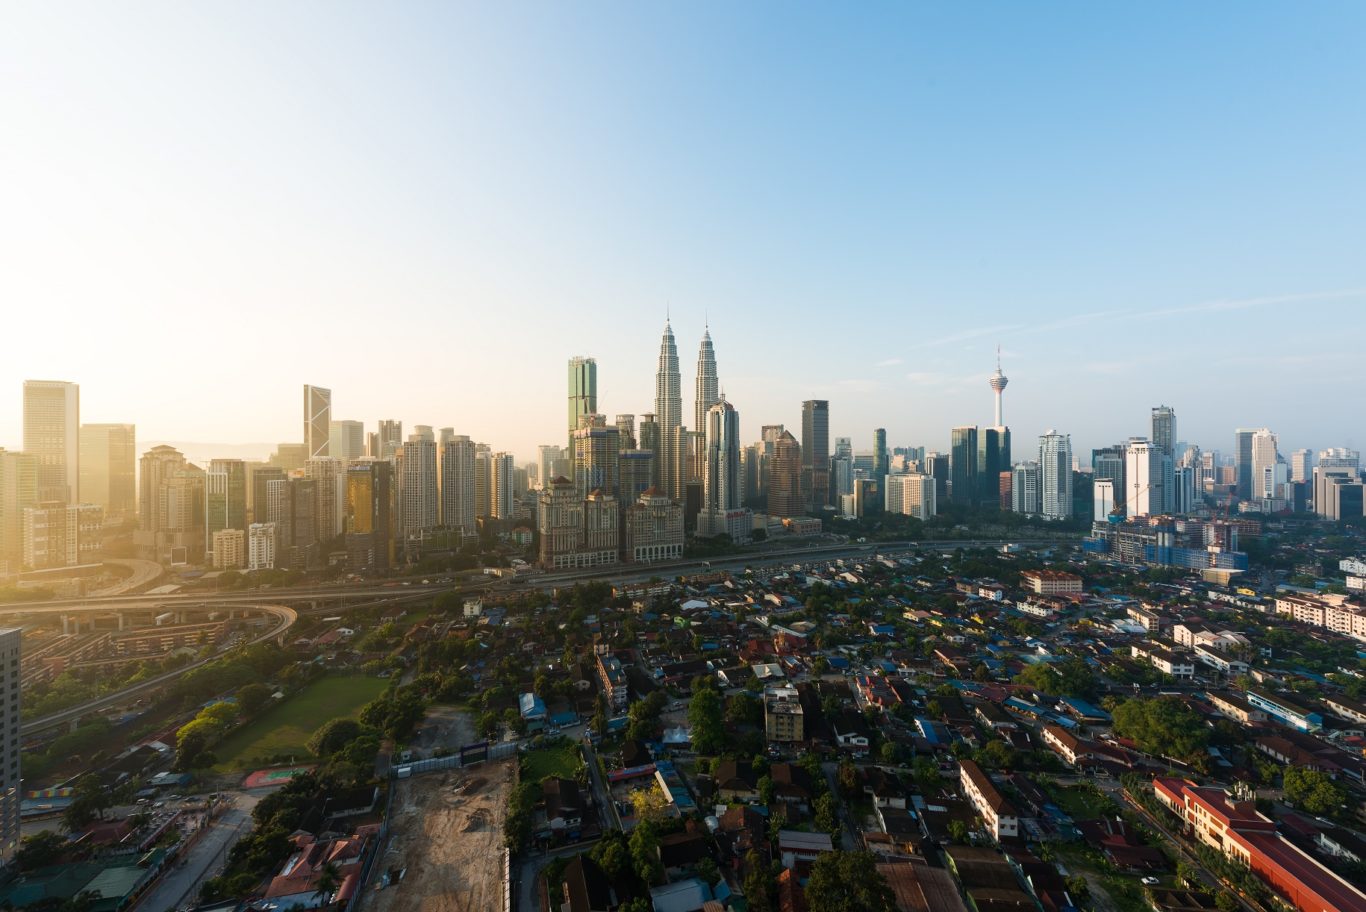 Malaysian Property Outlook 2023: 3 Reasons Why It’s Good To Buy